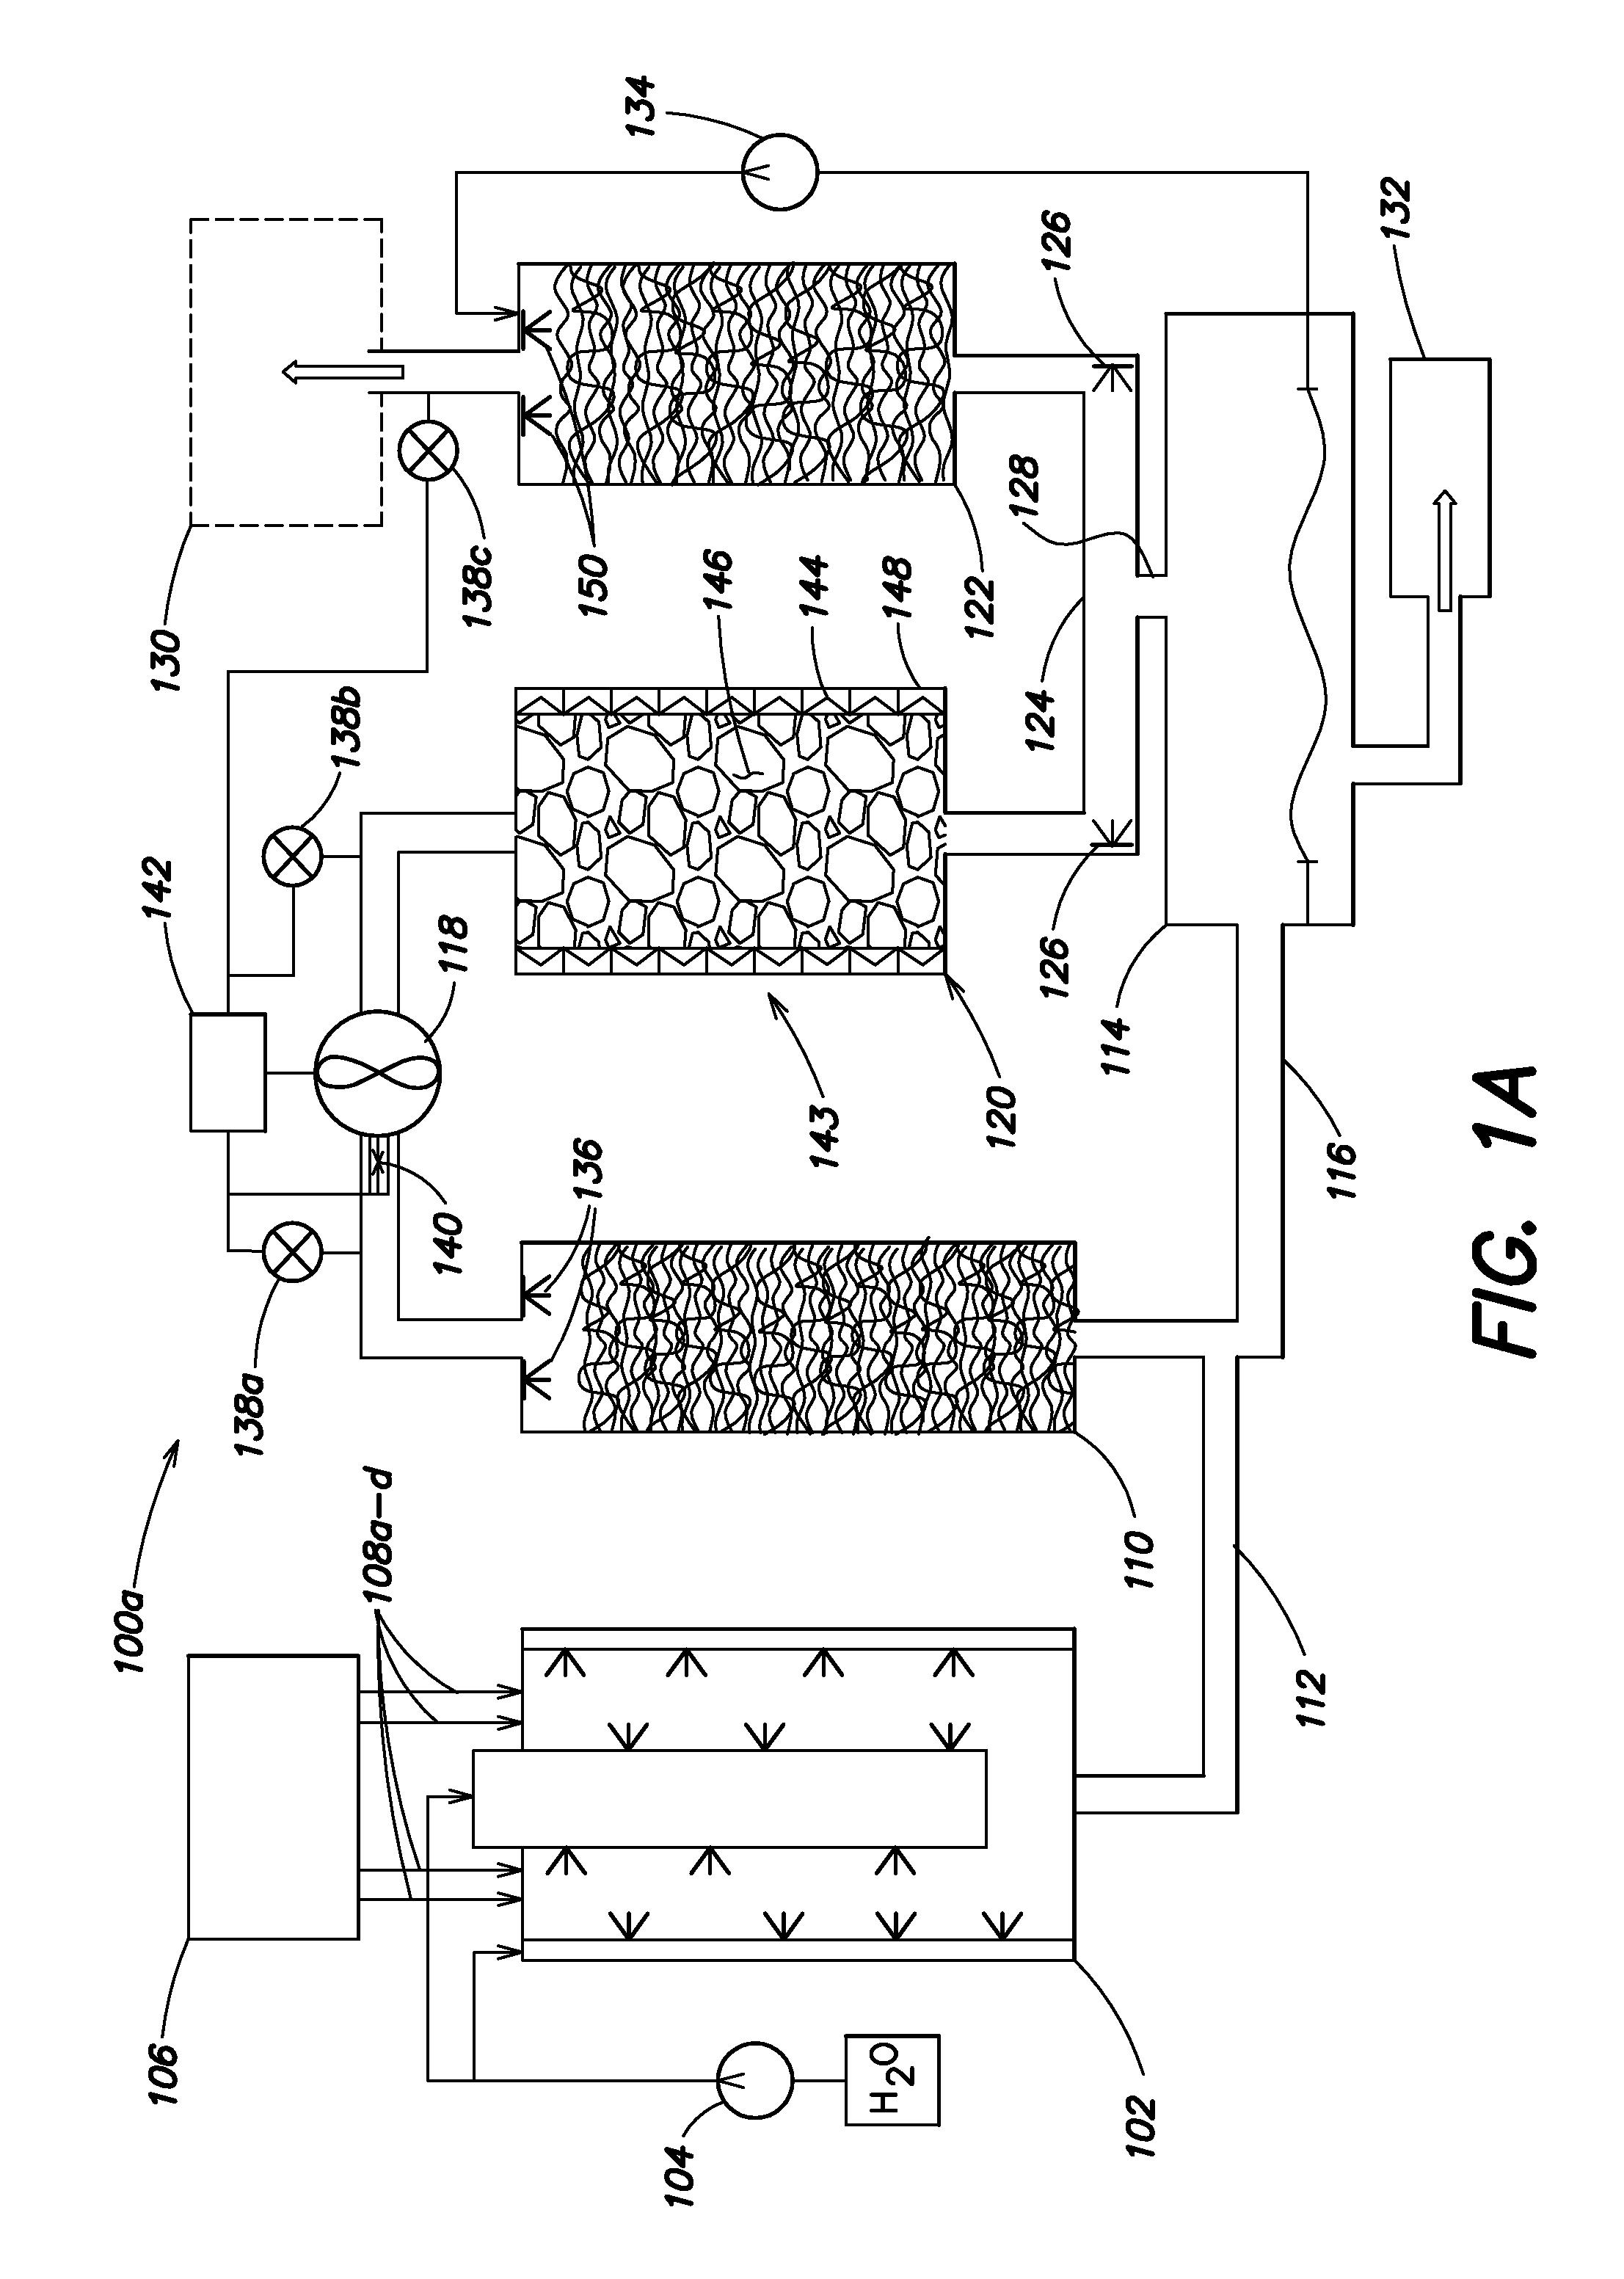 Methods and apparatus for PFC abatement using a CDO chamber